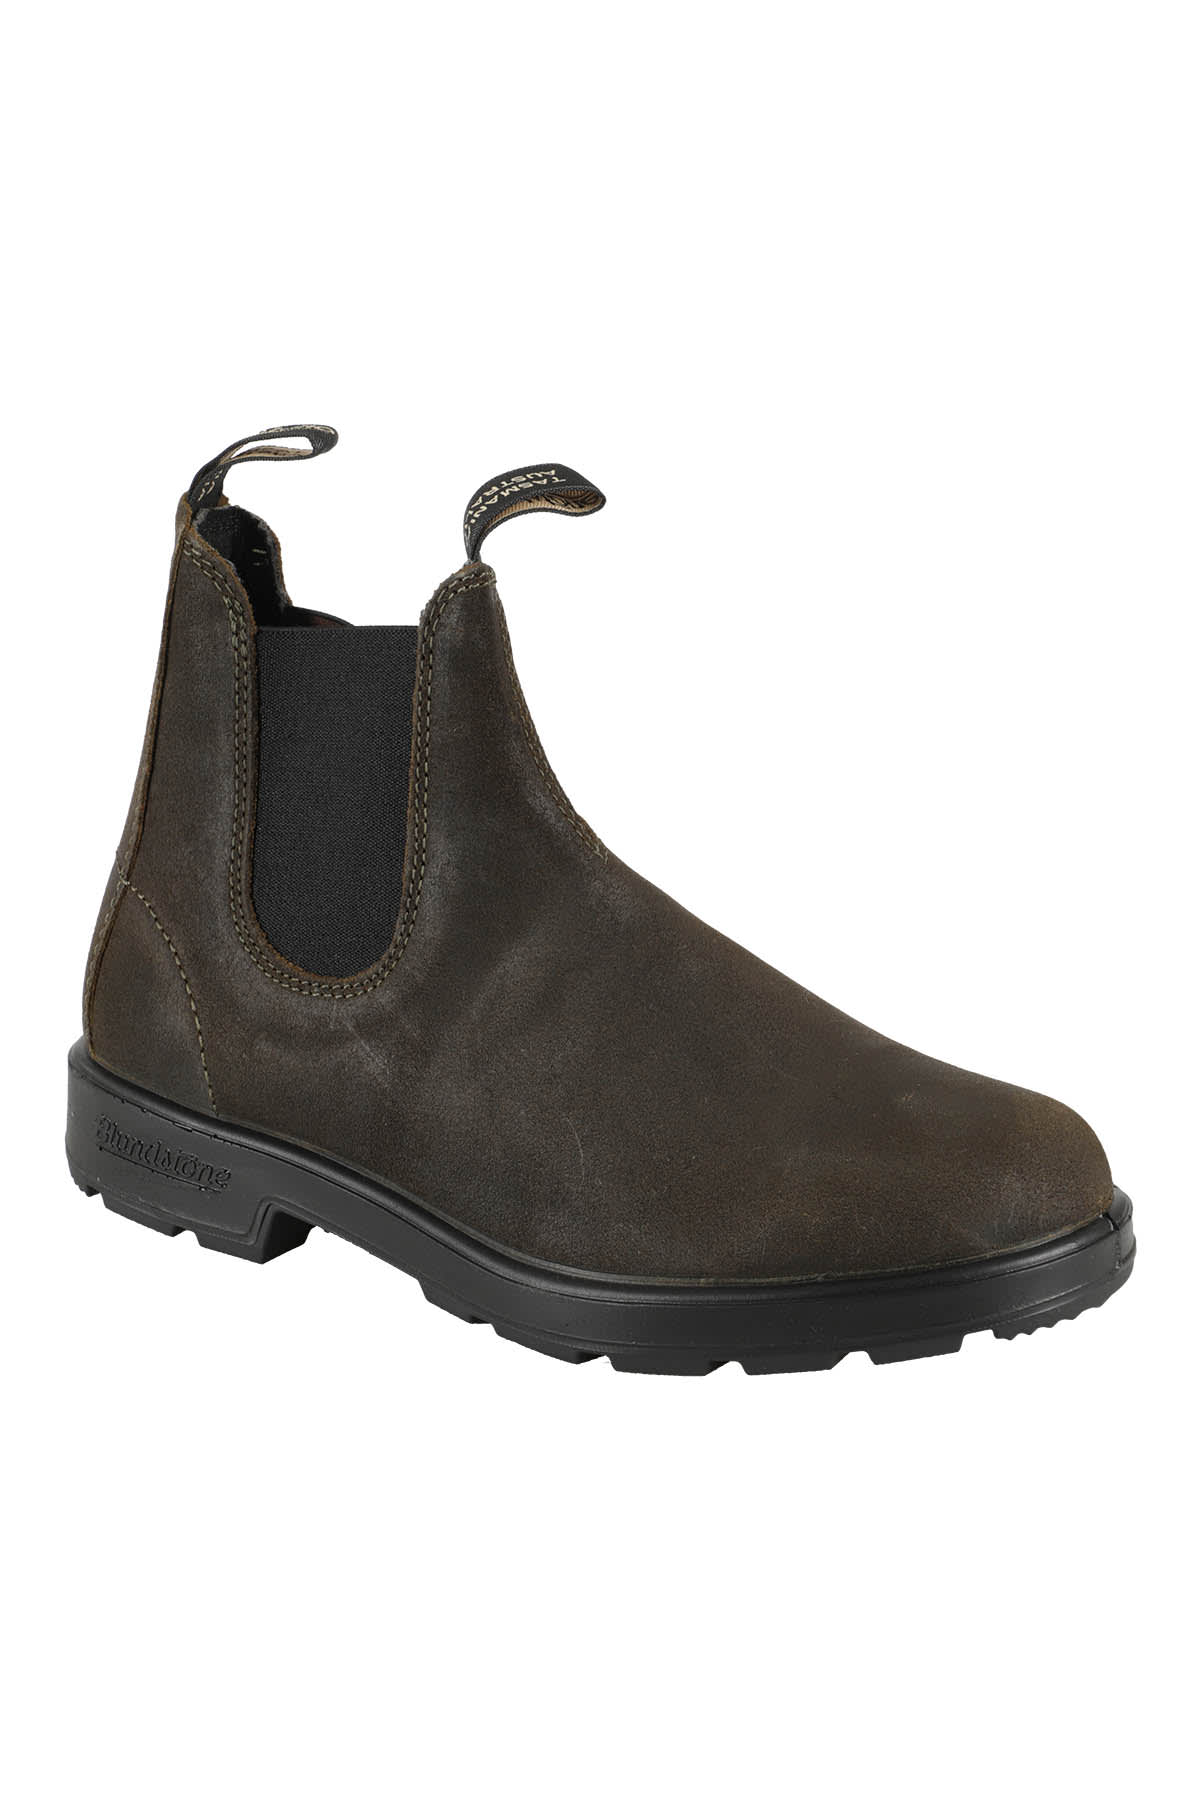 Shop Blundstone Waxed Suede In Olive Suede Black